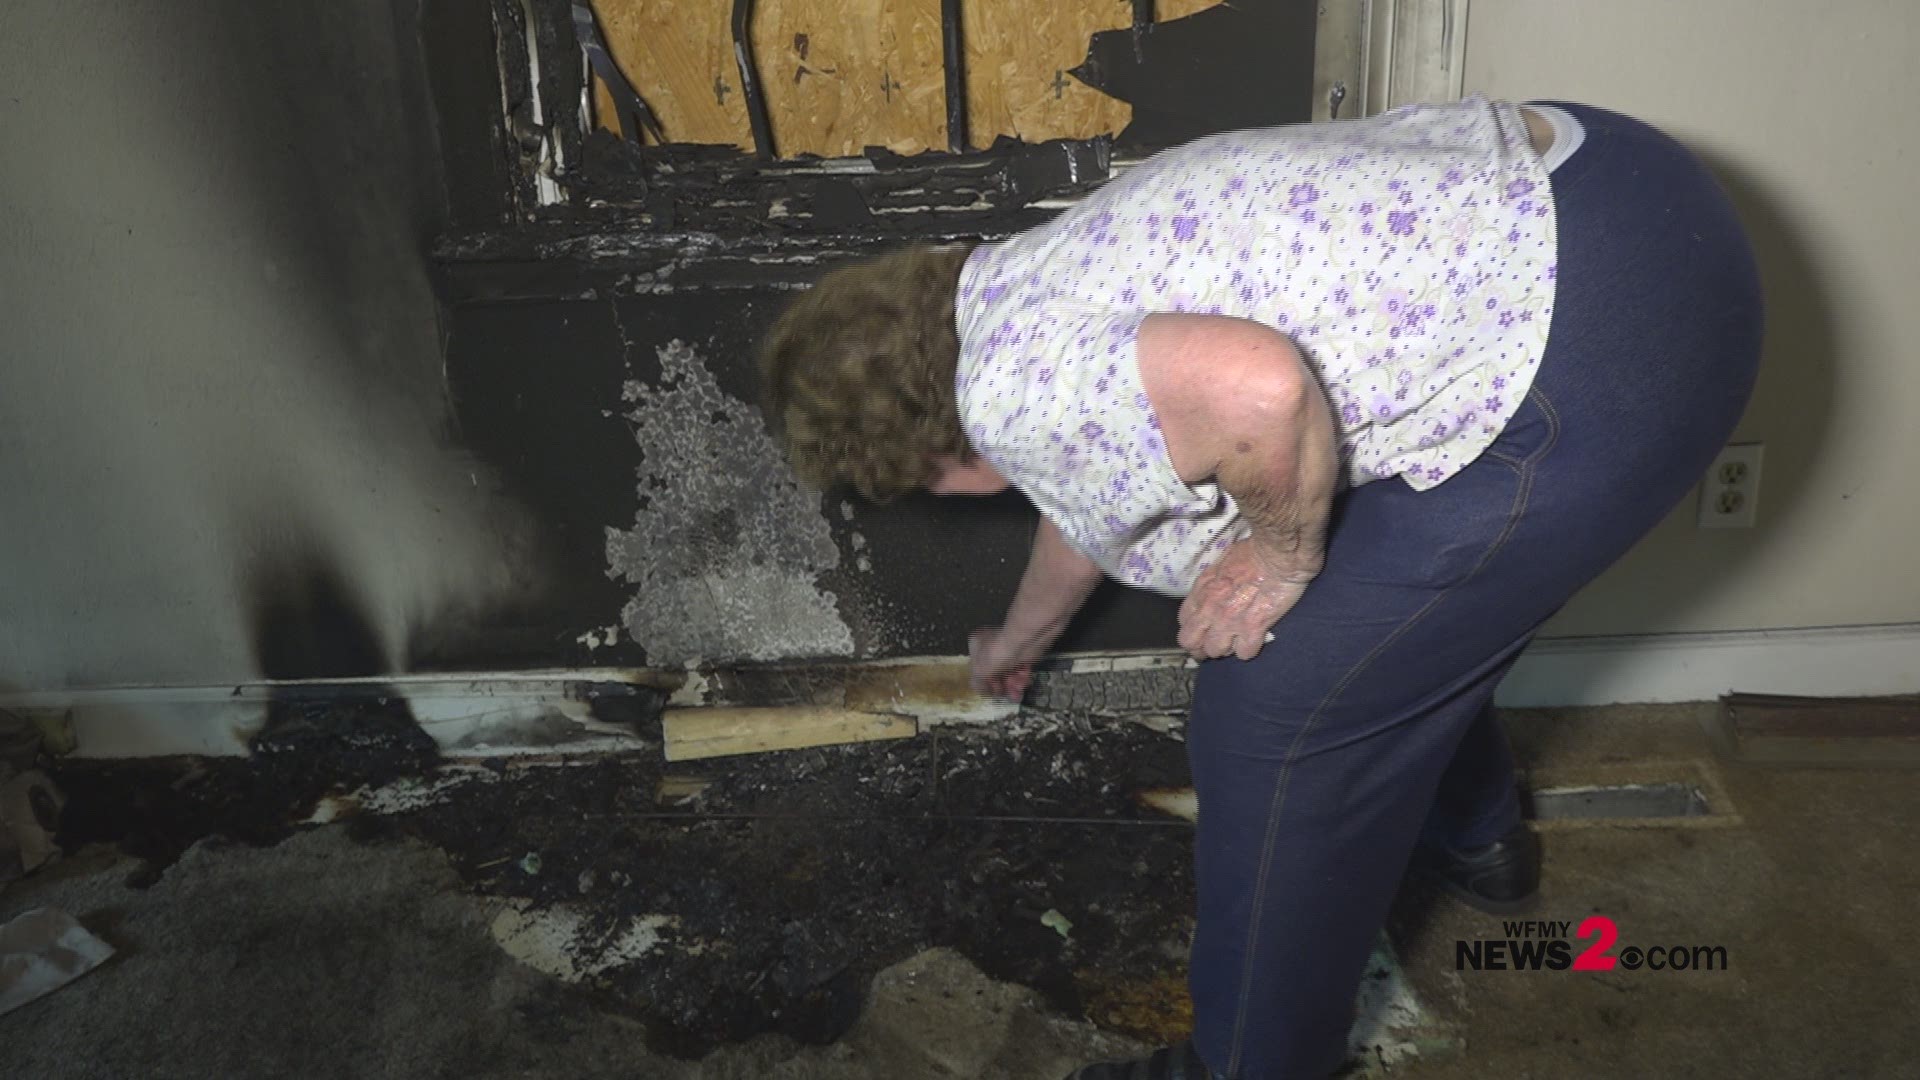 Arlis Farlow says someone threw a fiery object through her window, ruining the home she was about to rent out.